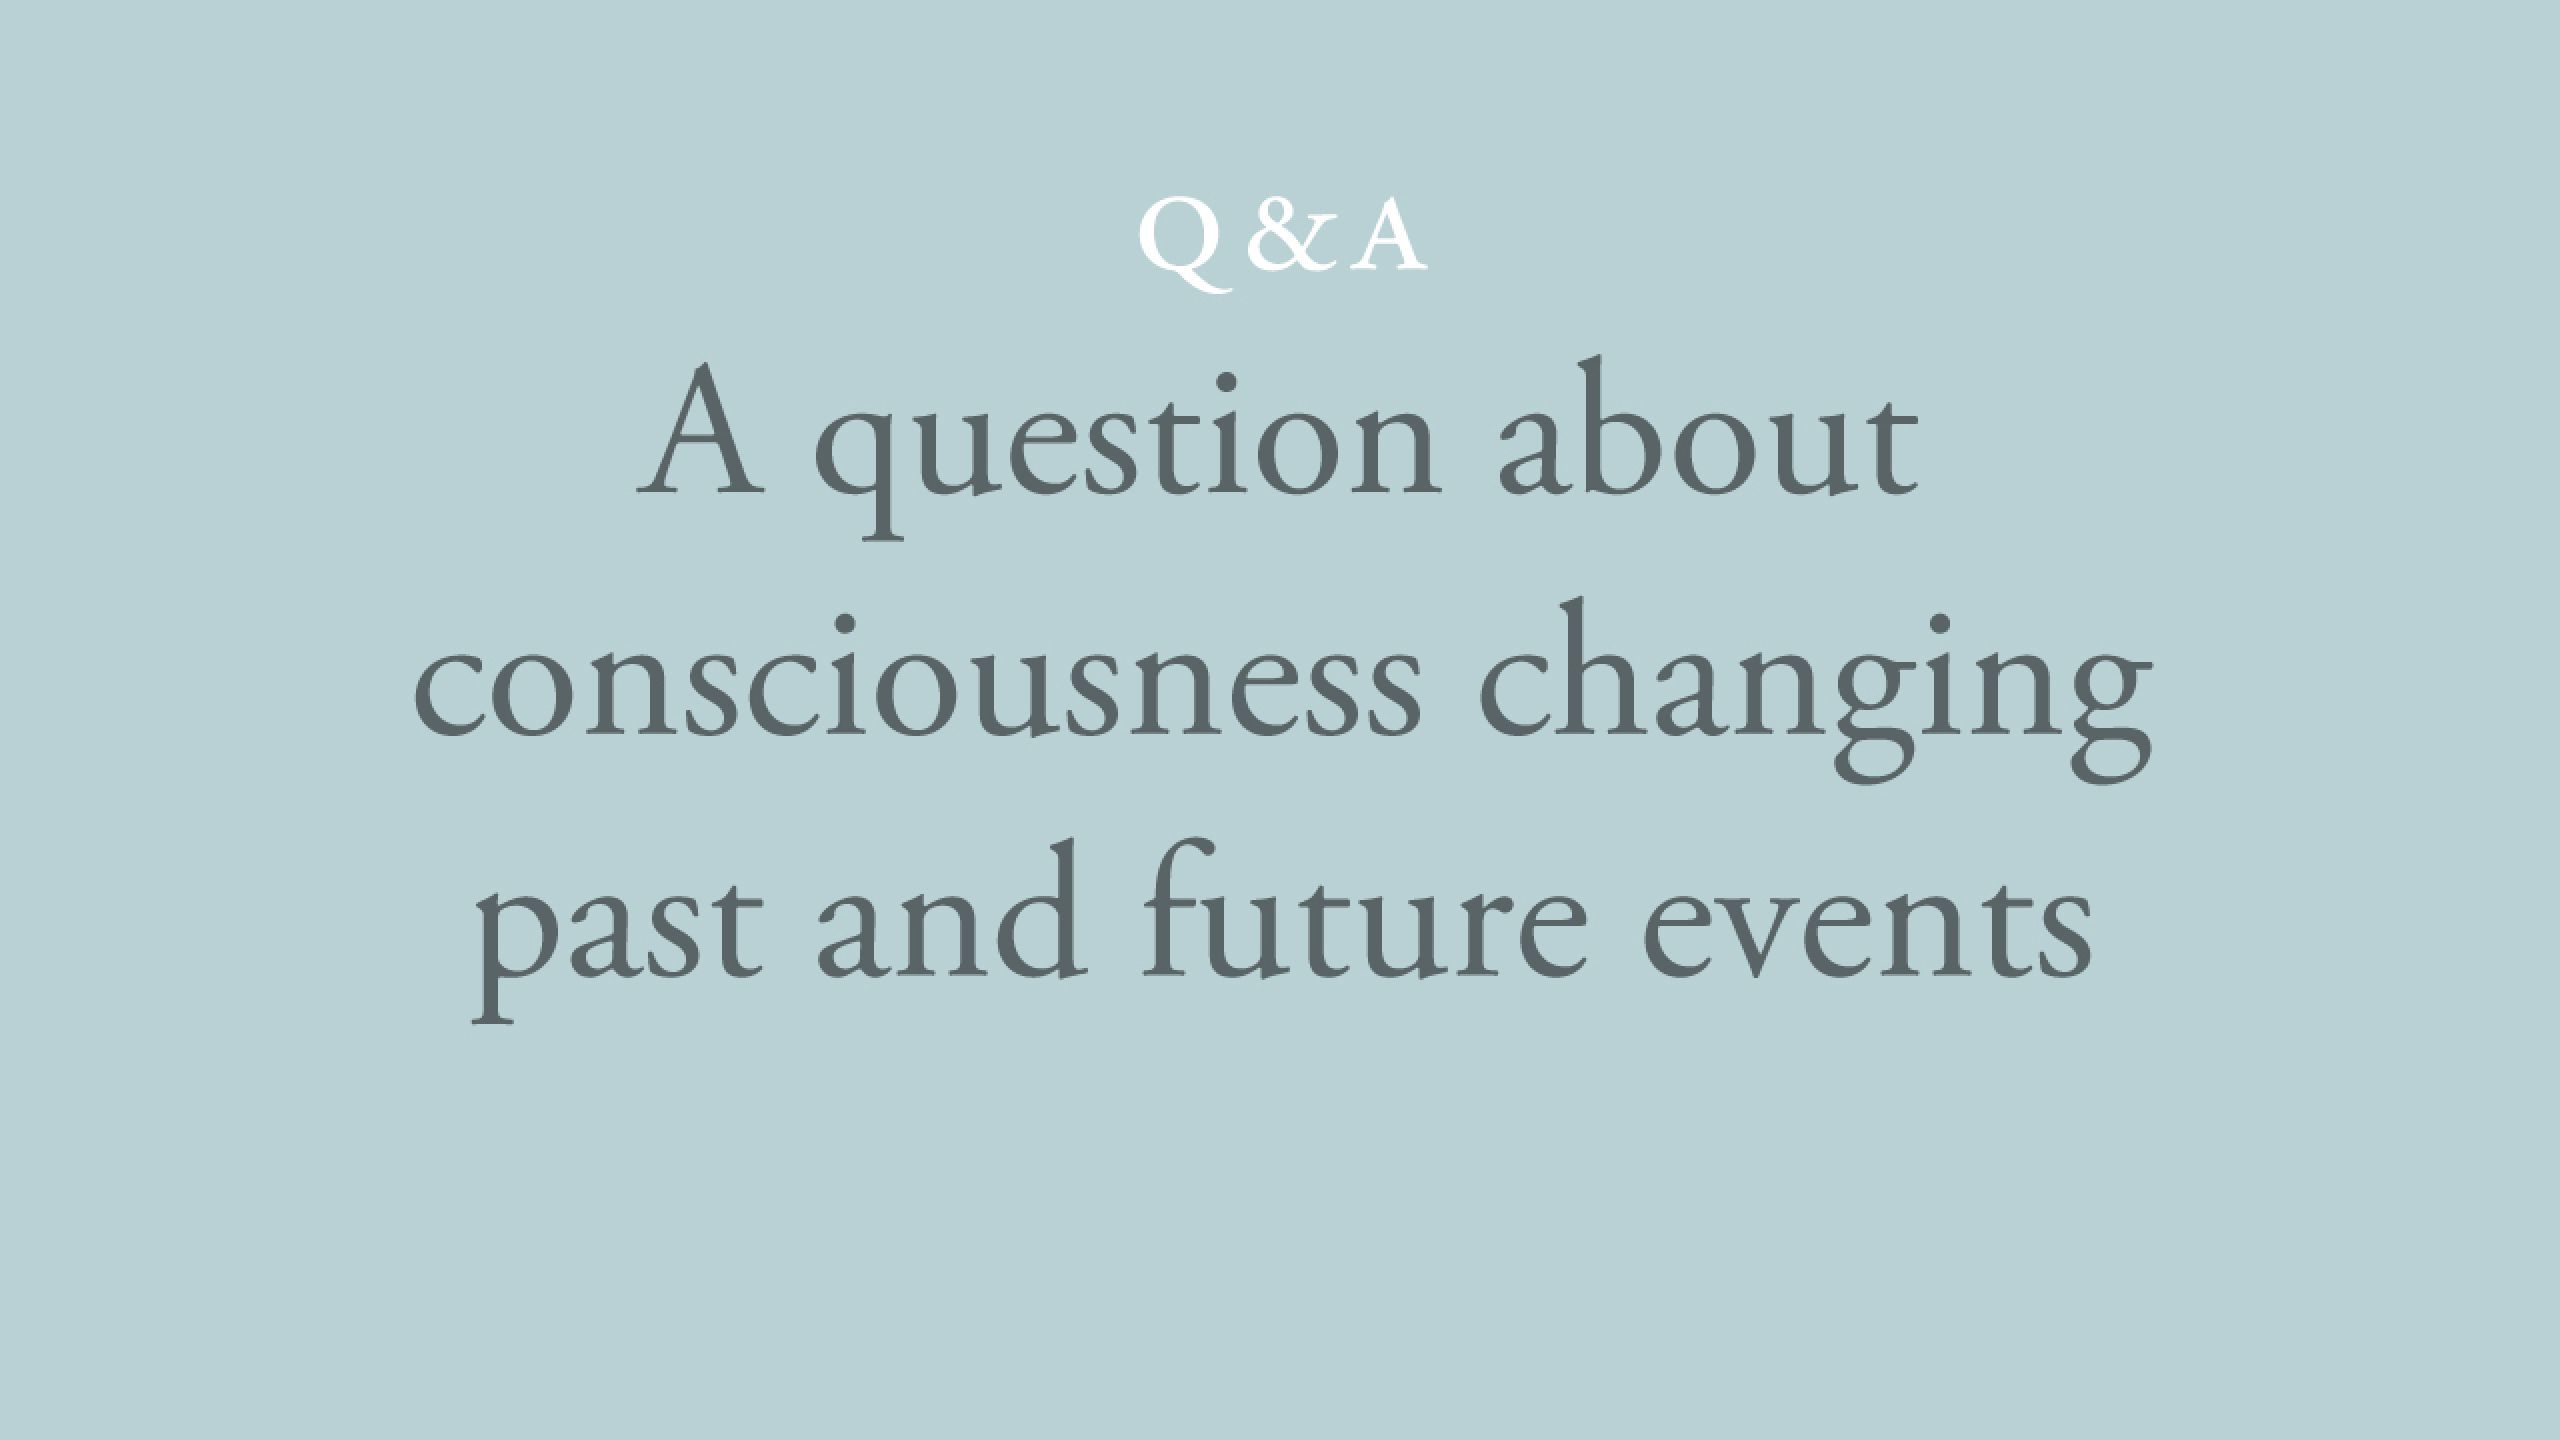 Can consciousness change past and future events?